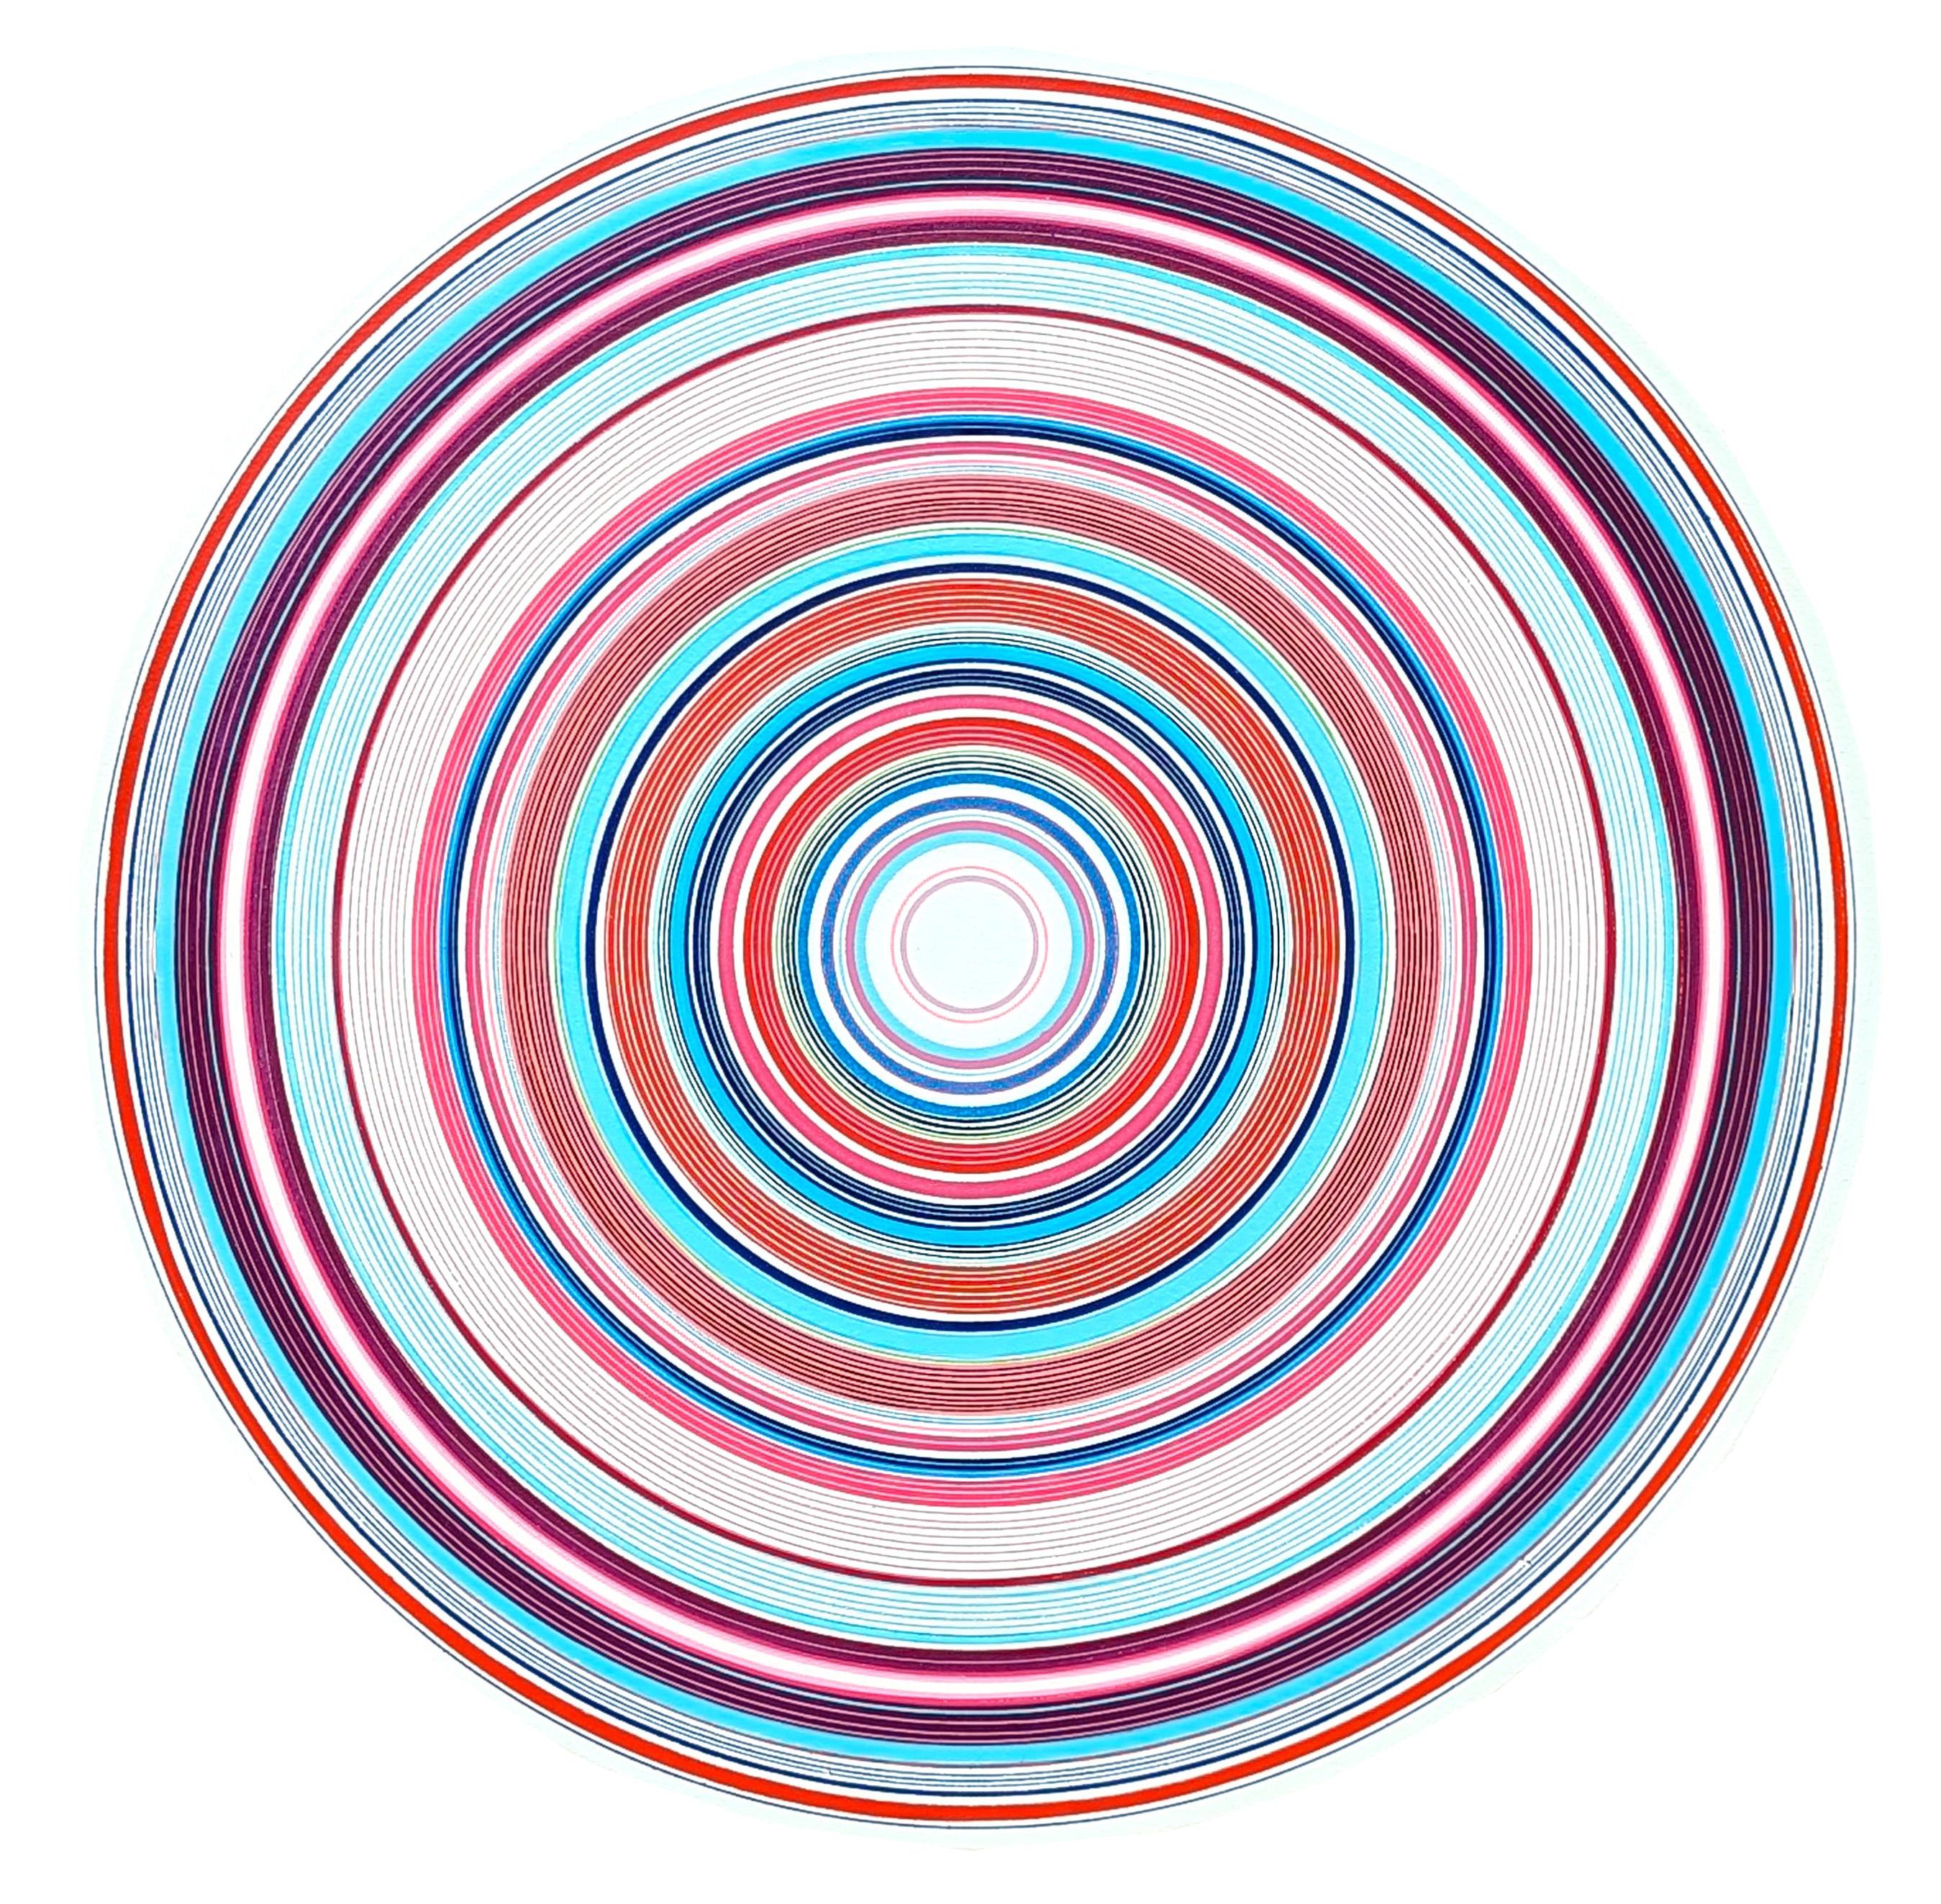 David Hardaker Abstract Painting - “Midnight Sun” Contemporary Pink, Blue, and Red Concentric Circle Painting